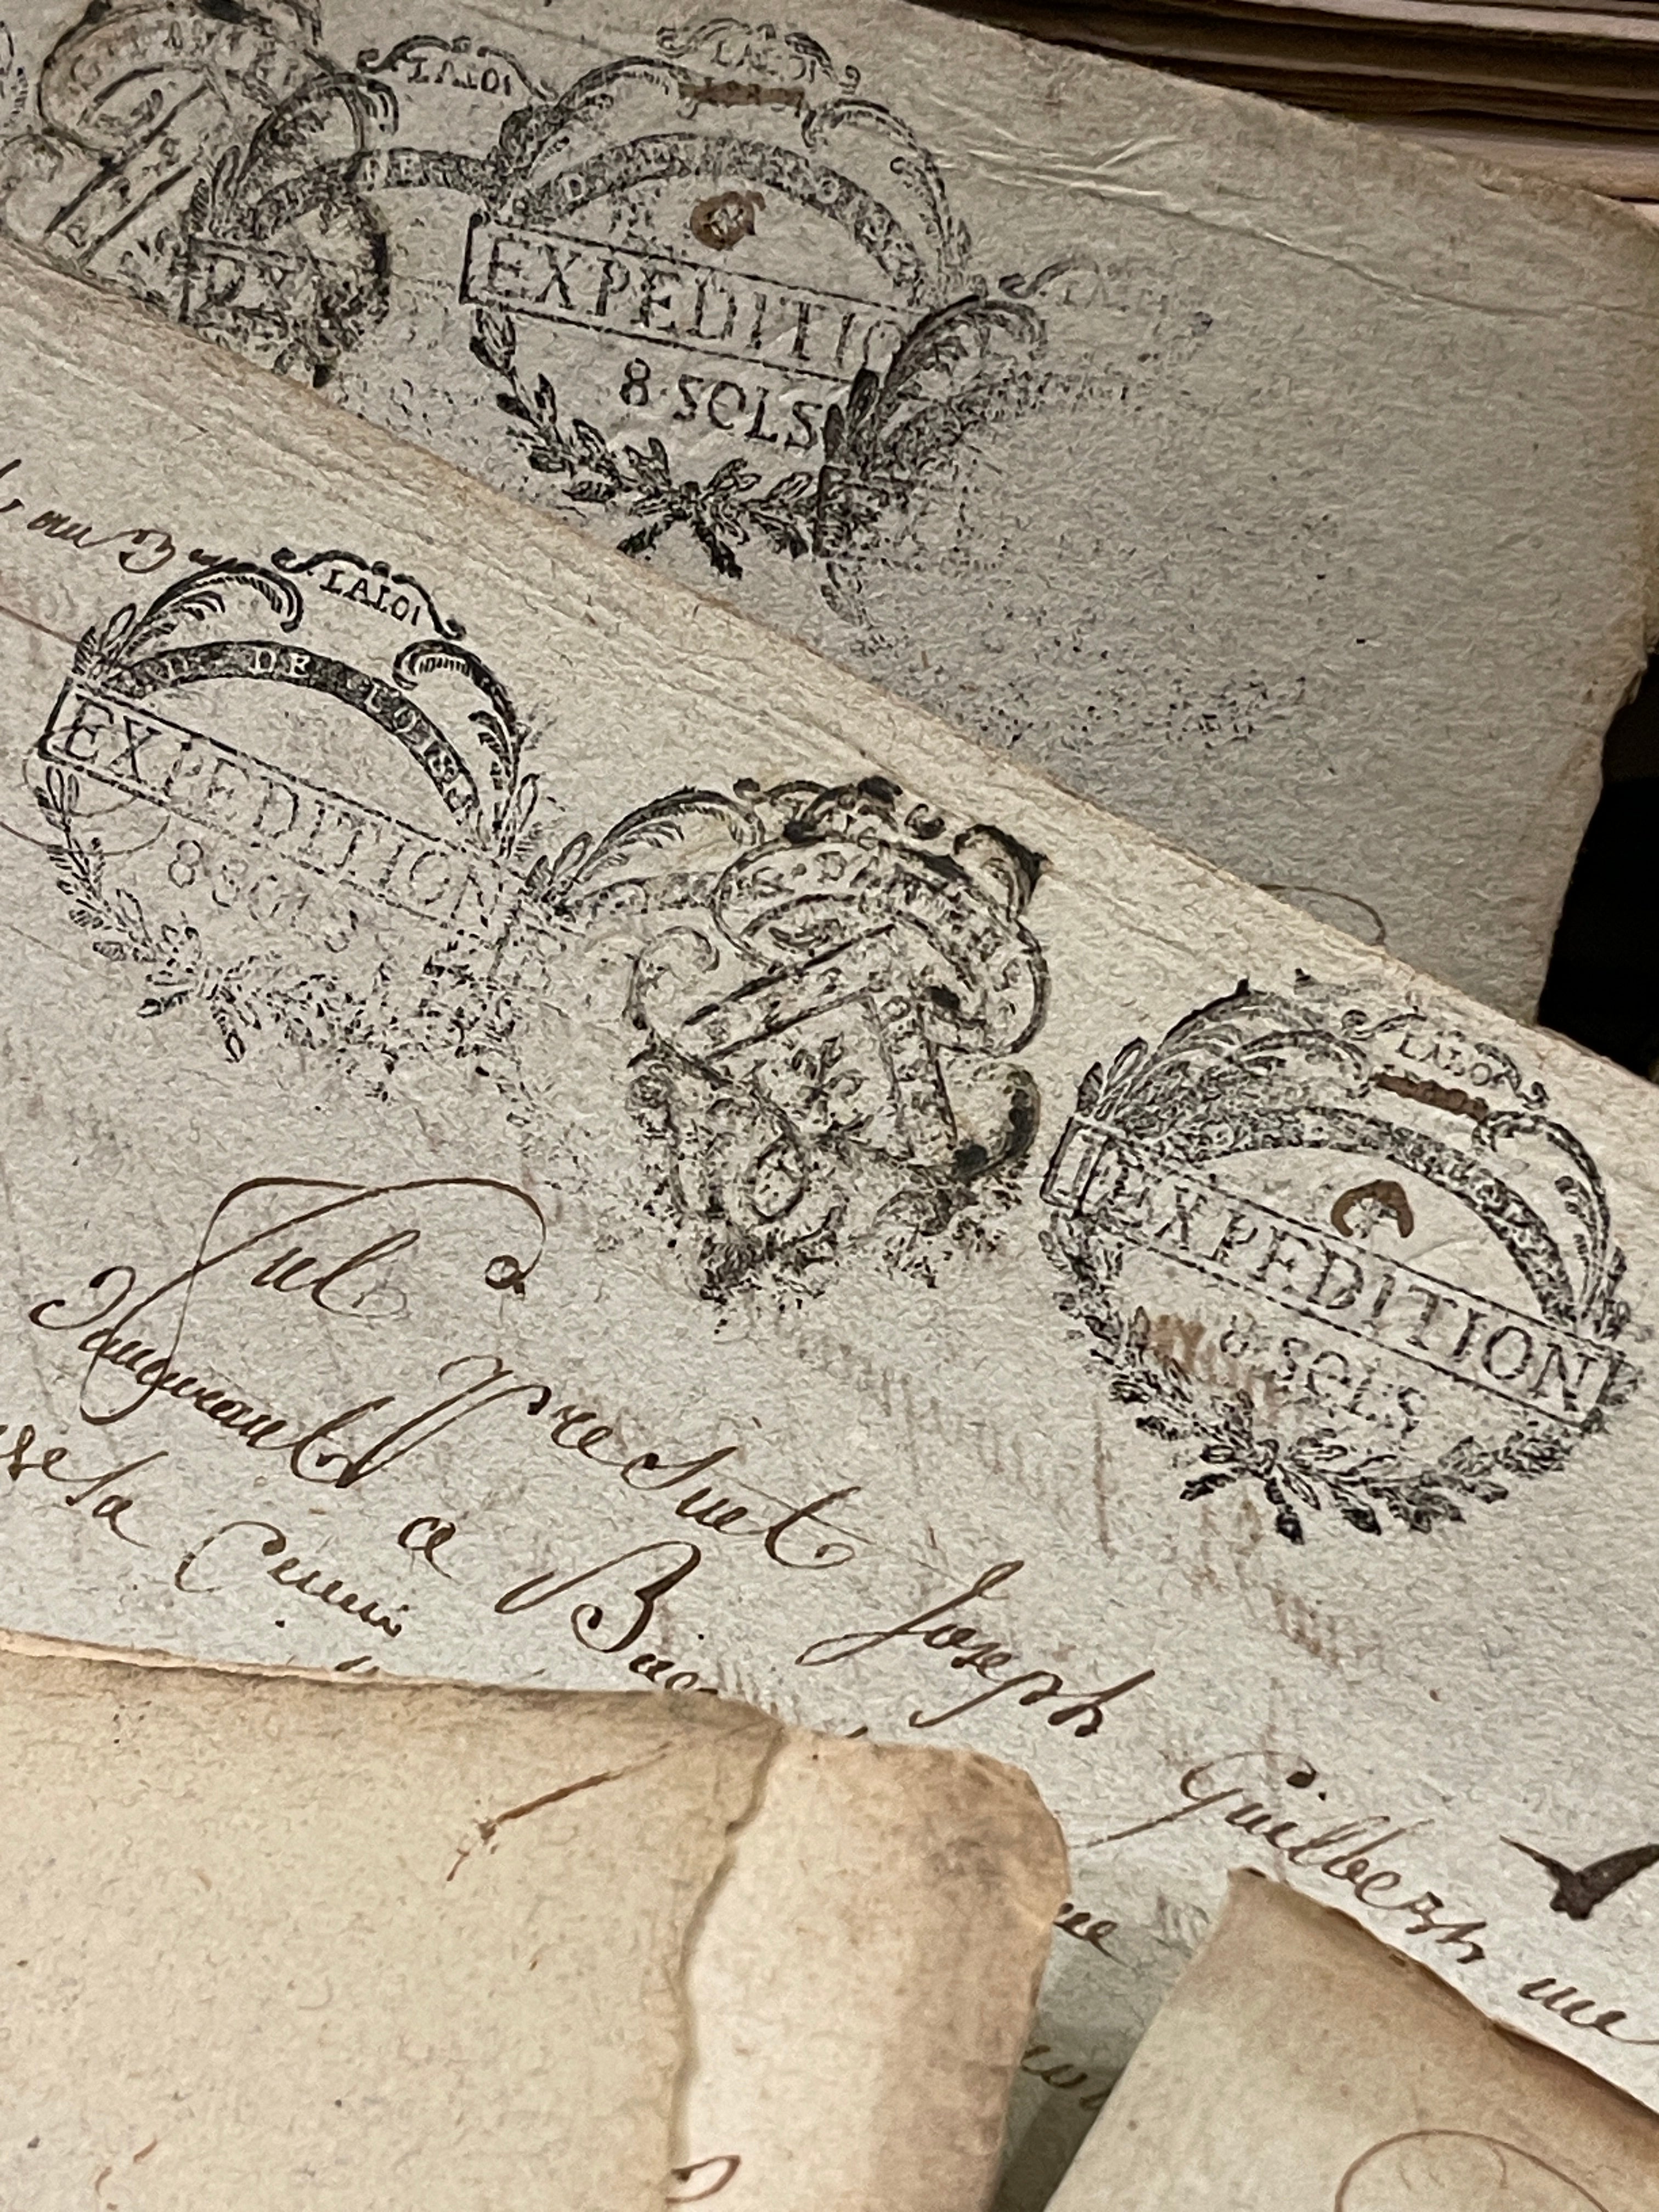 Fantastic TRIPLE Stamped 1700's  Antique French Script Document Pages